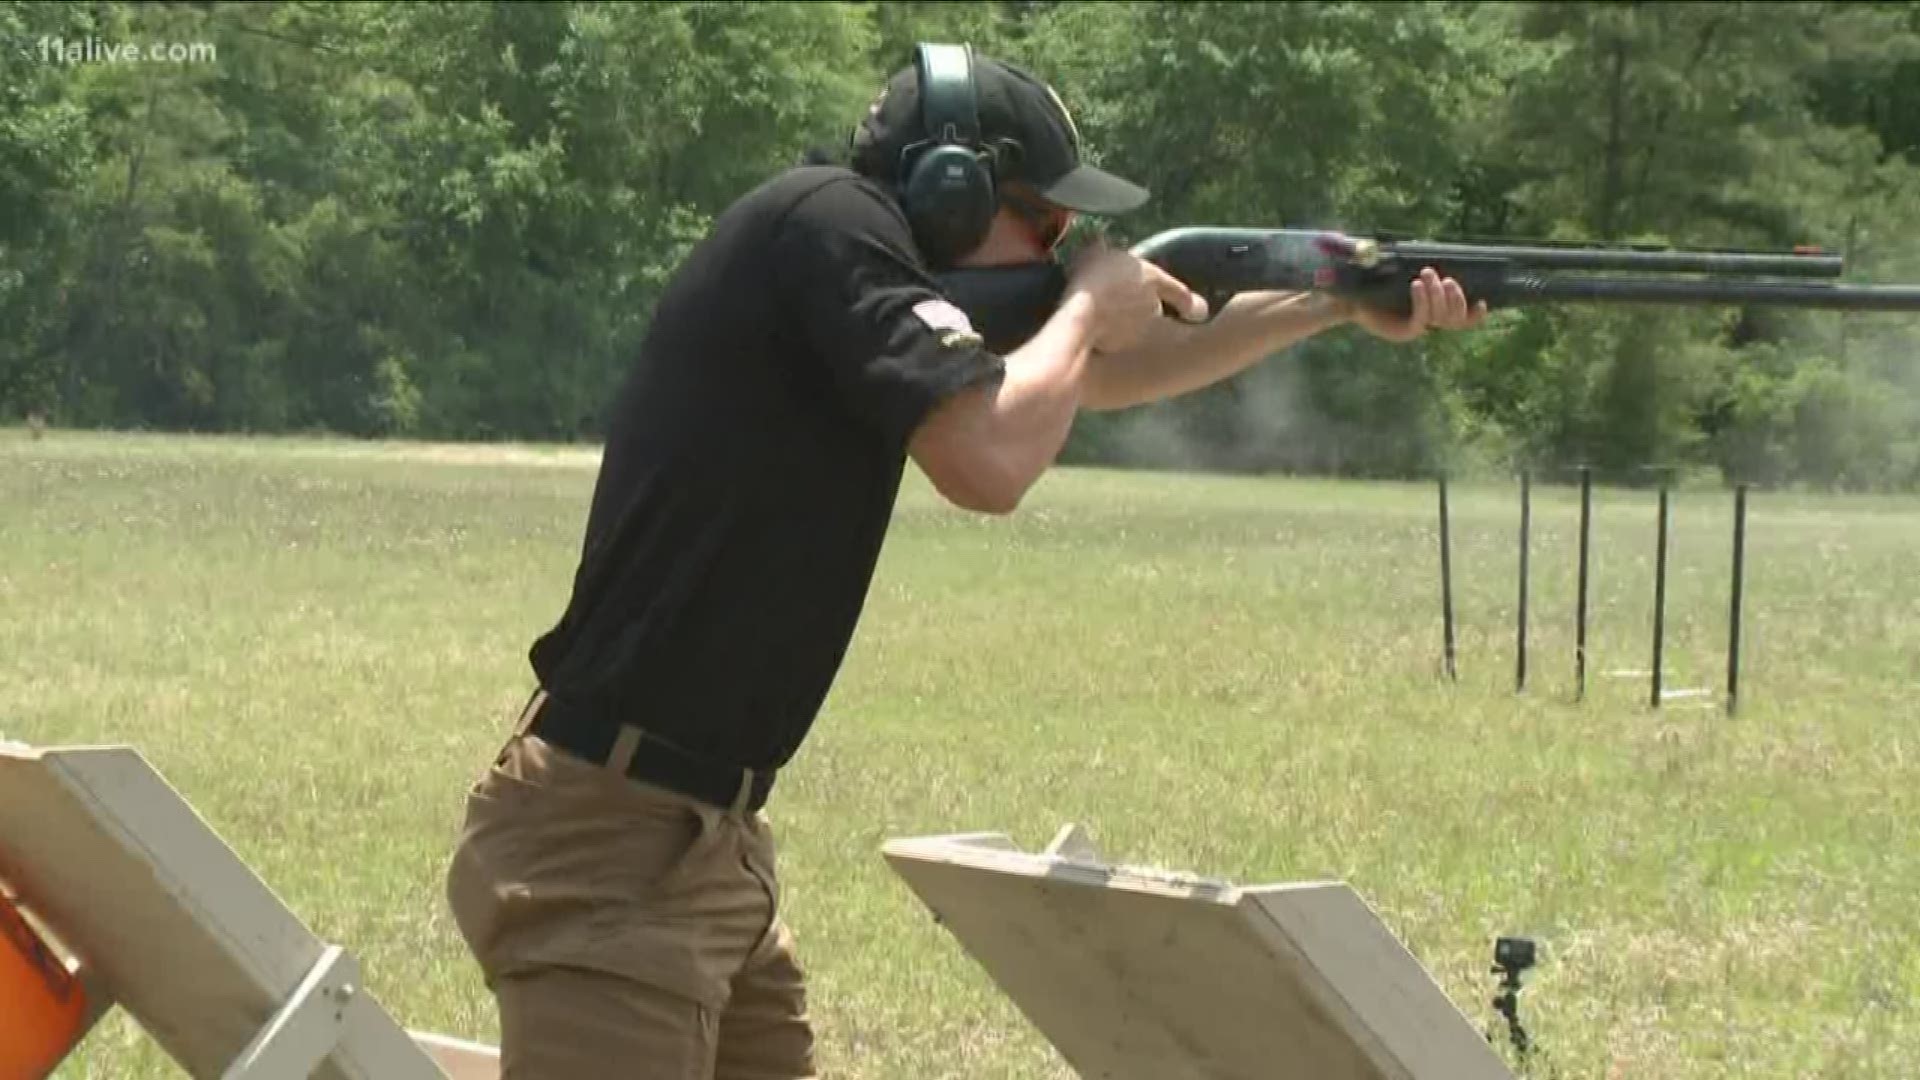 Many had never held a gun before visiting Fort Benning